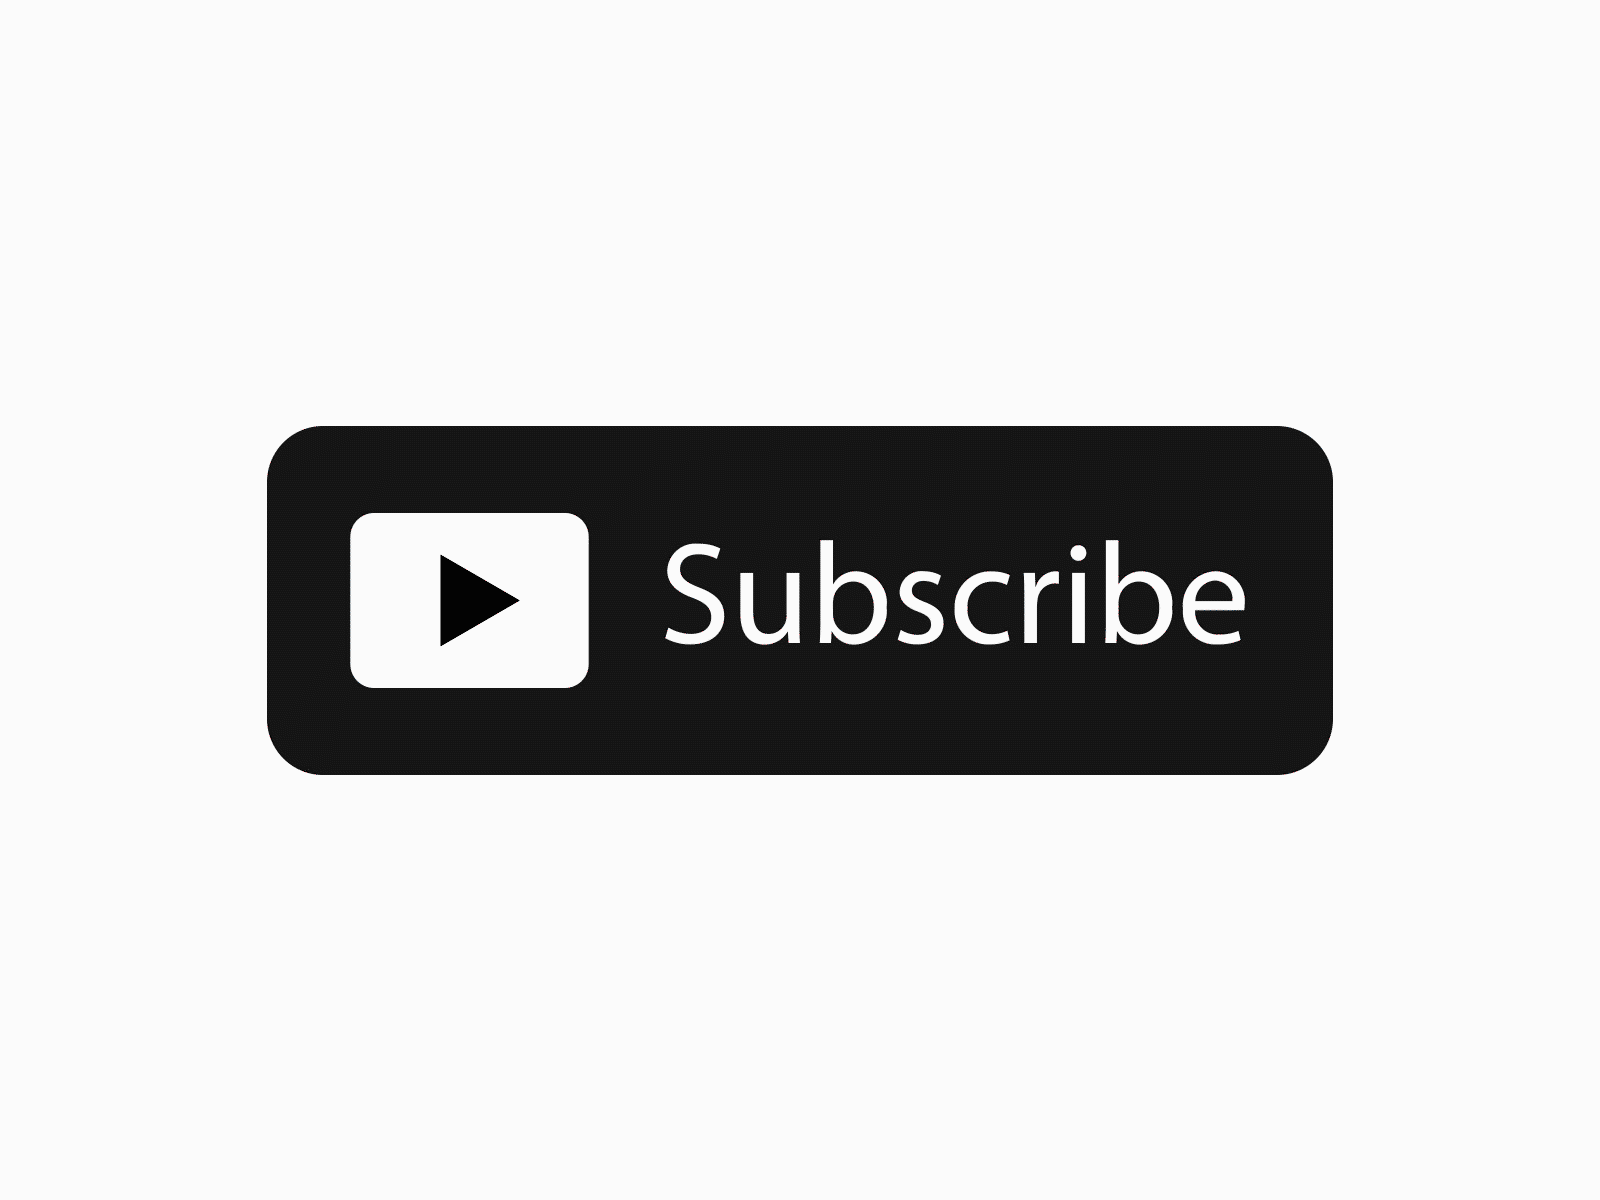 Free YouTube Subscribe Button Animating Icon animating subscribe button free youtube icon icon icon design illustration red subscribe button subscribe button youtube icon youtube subscribe button icon